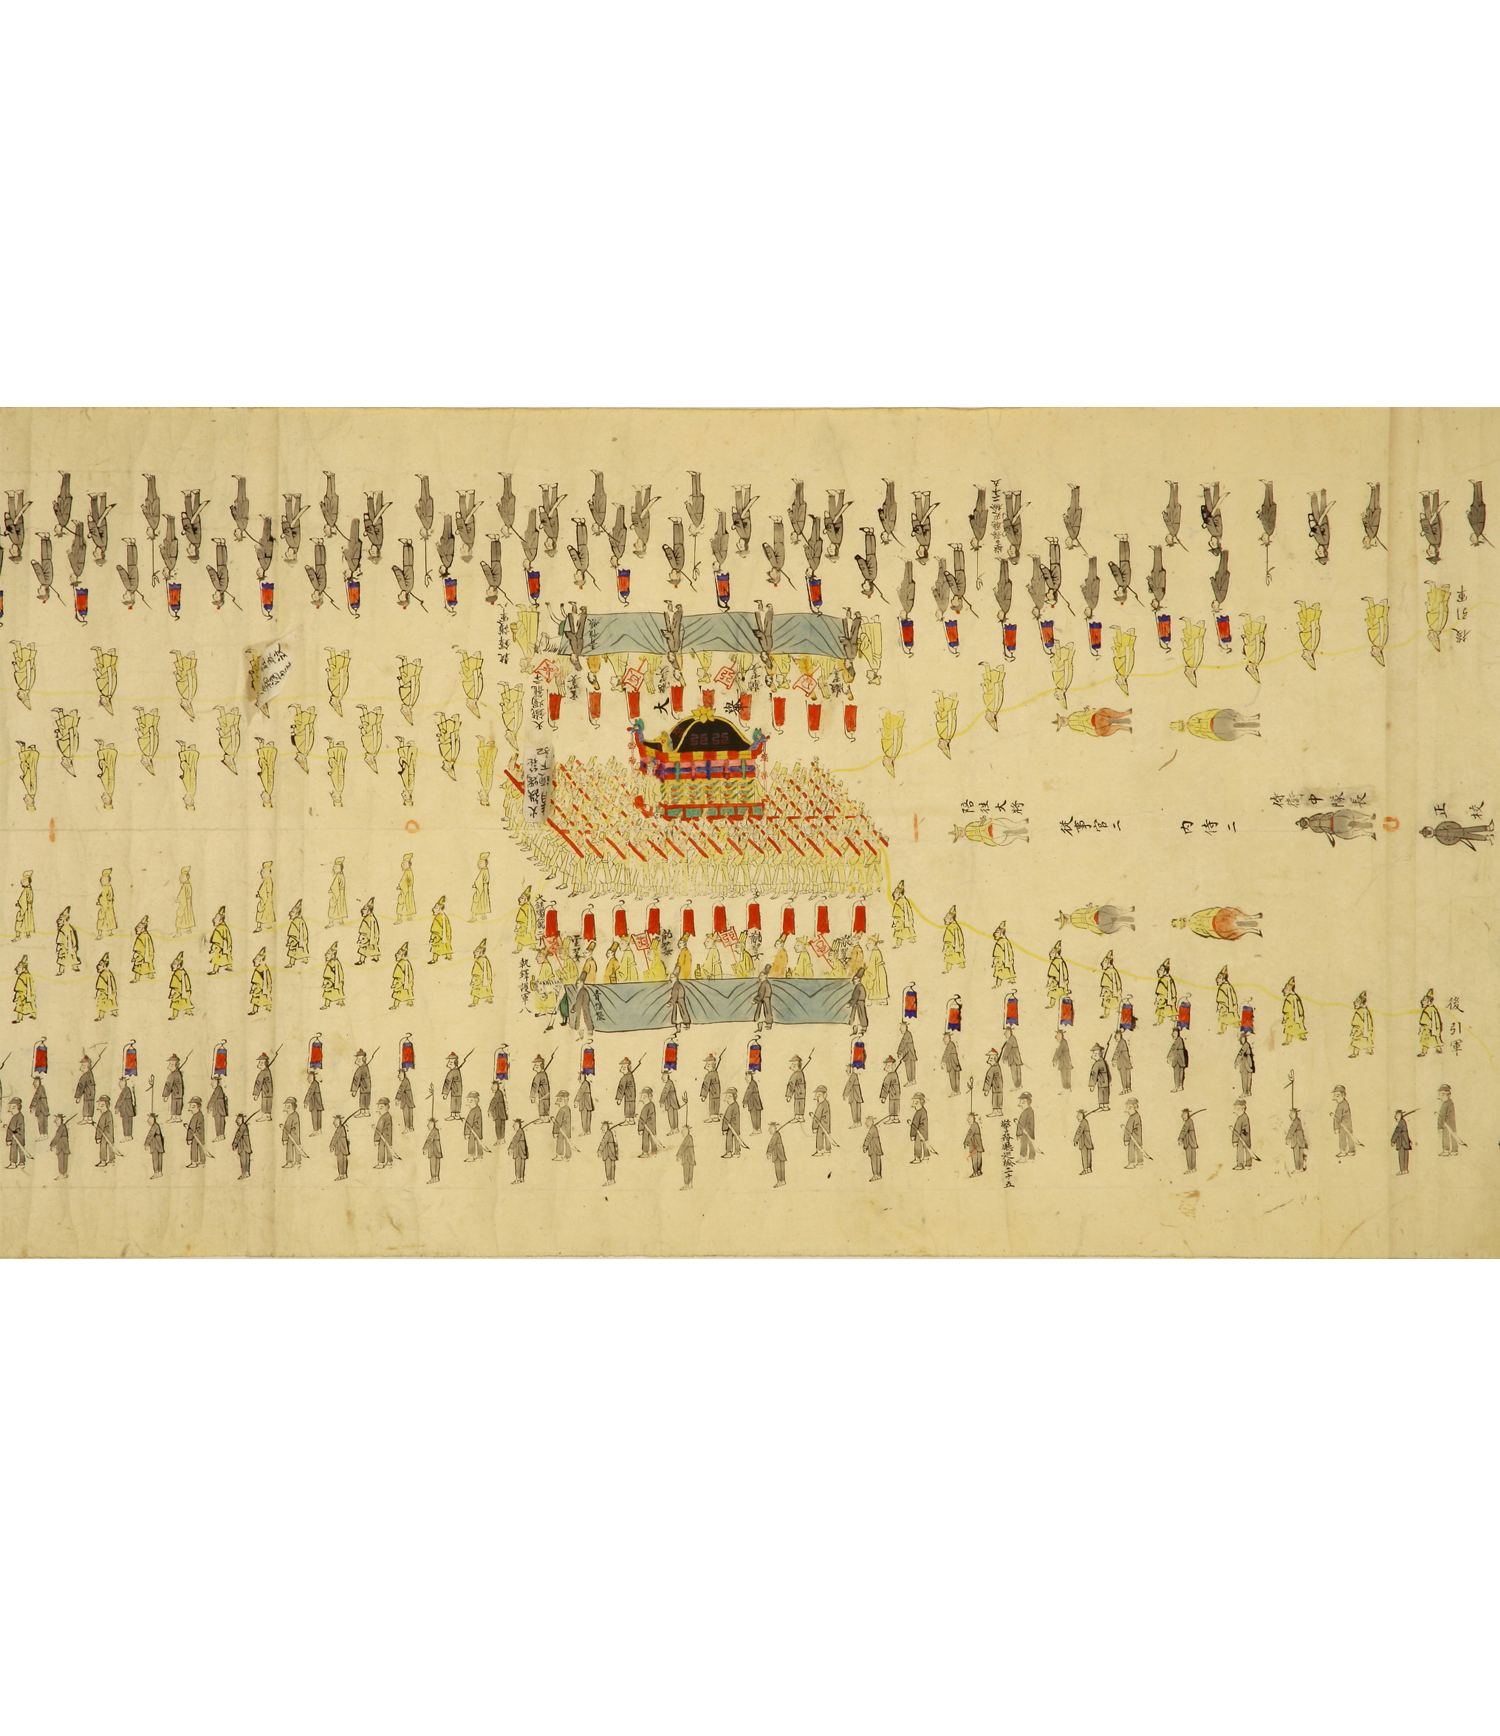 The Funeral Procession of Empress Myeongseong